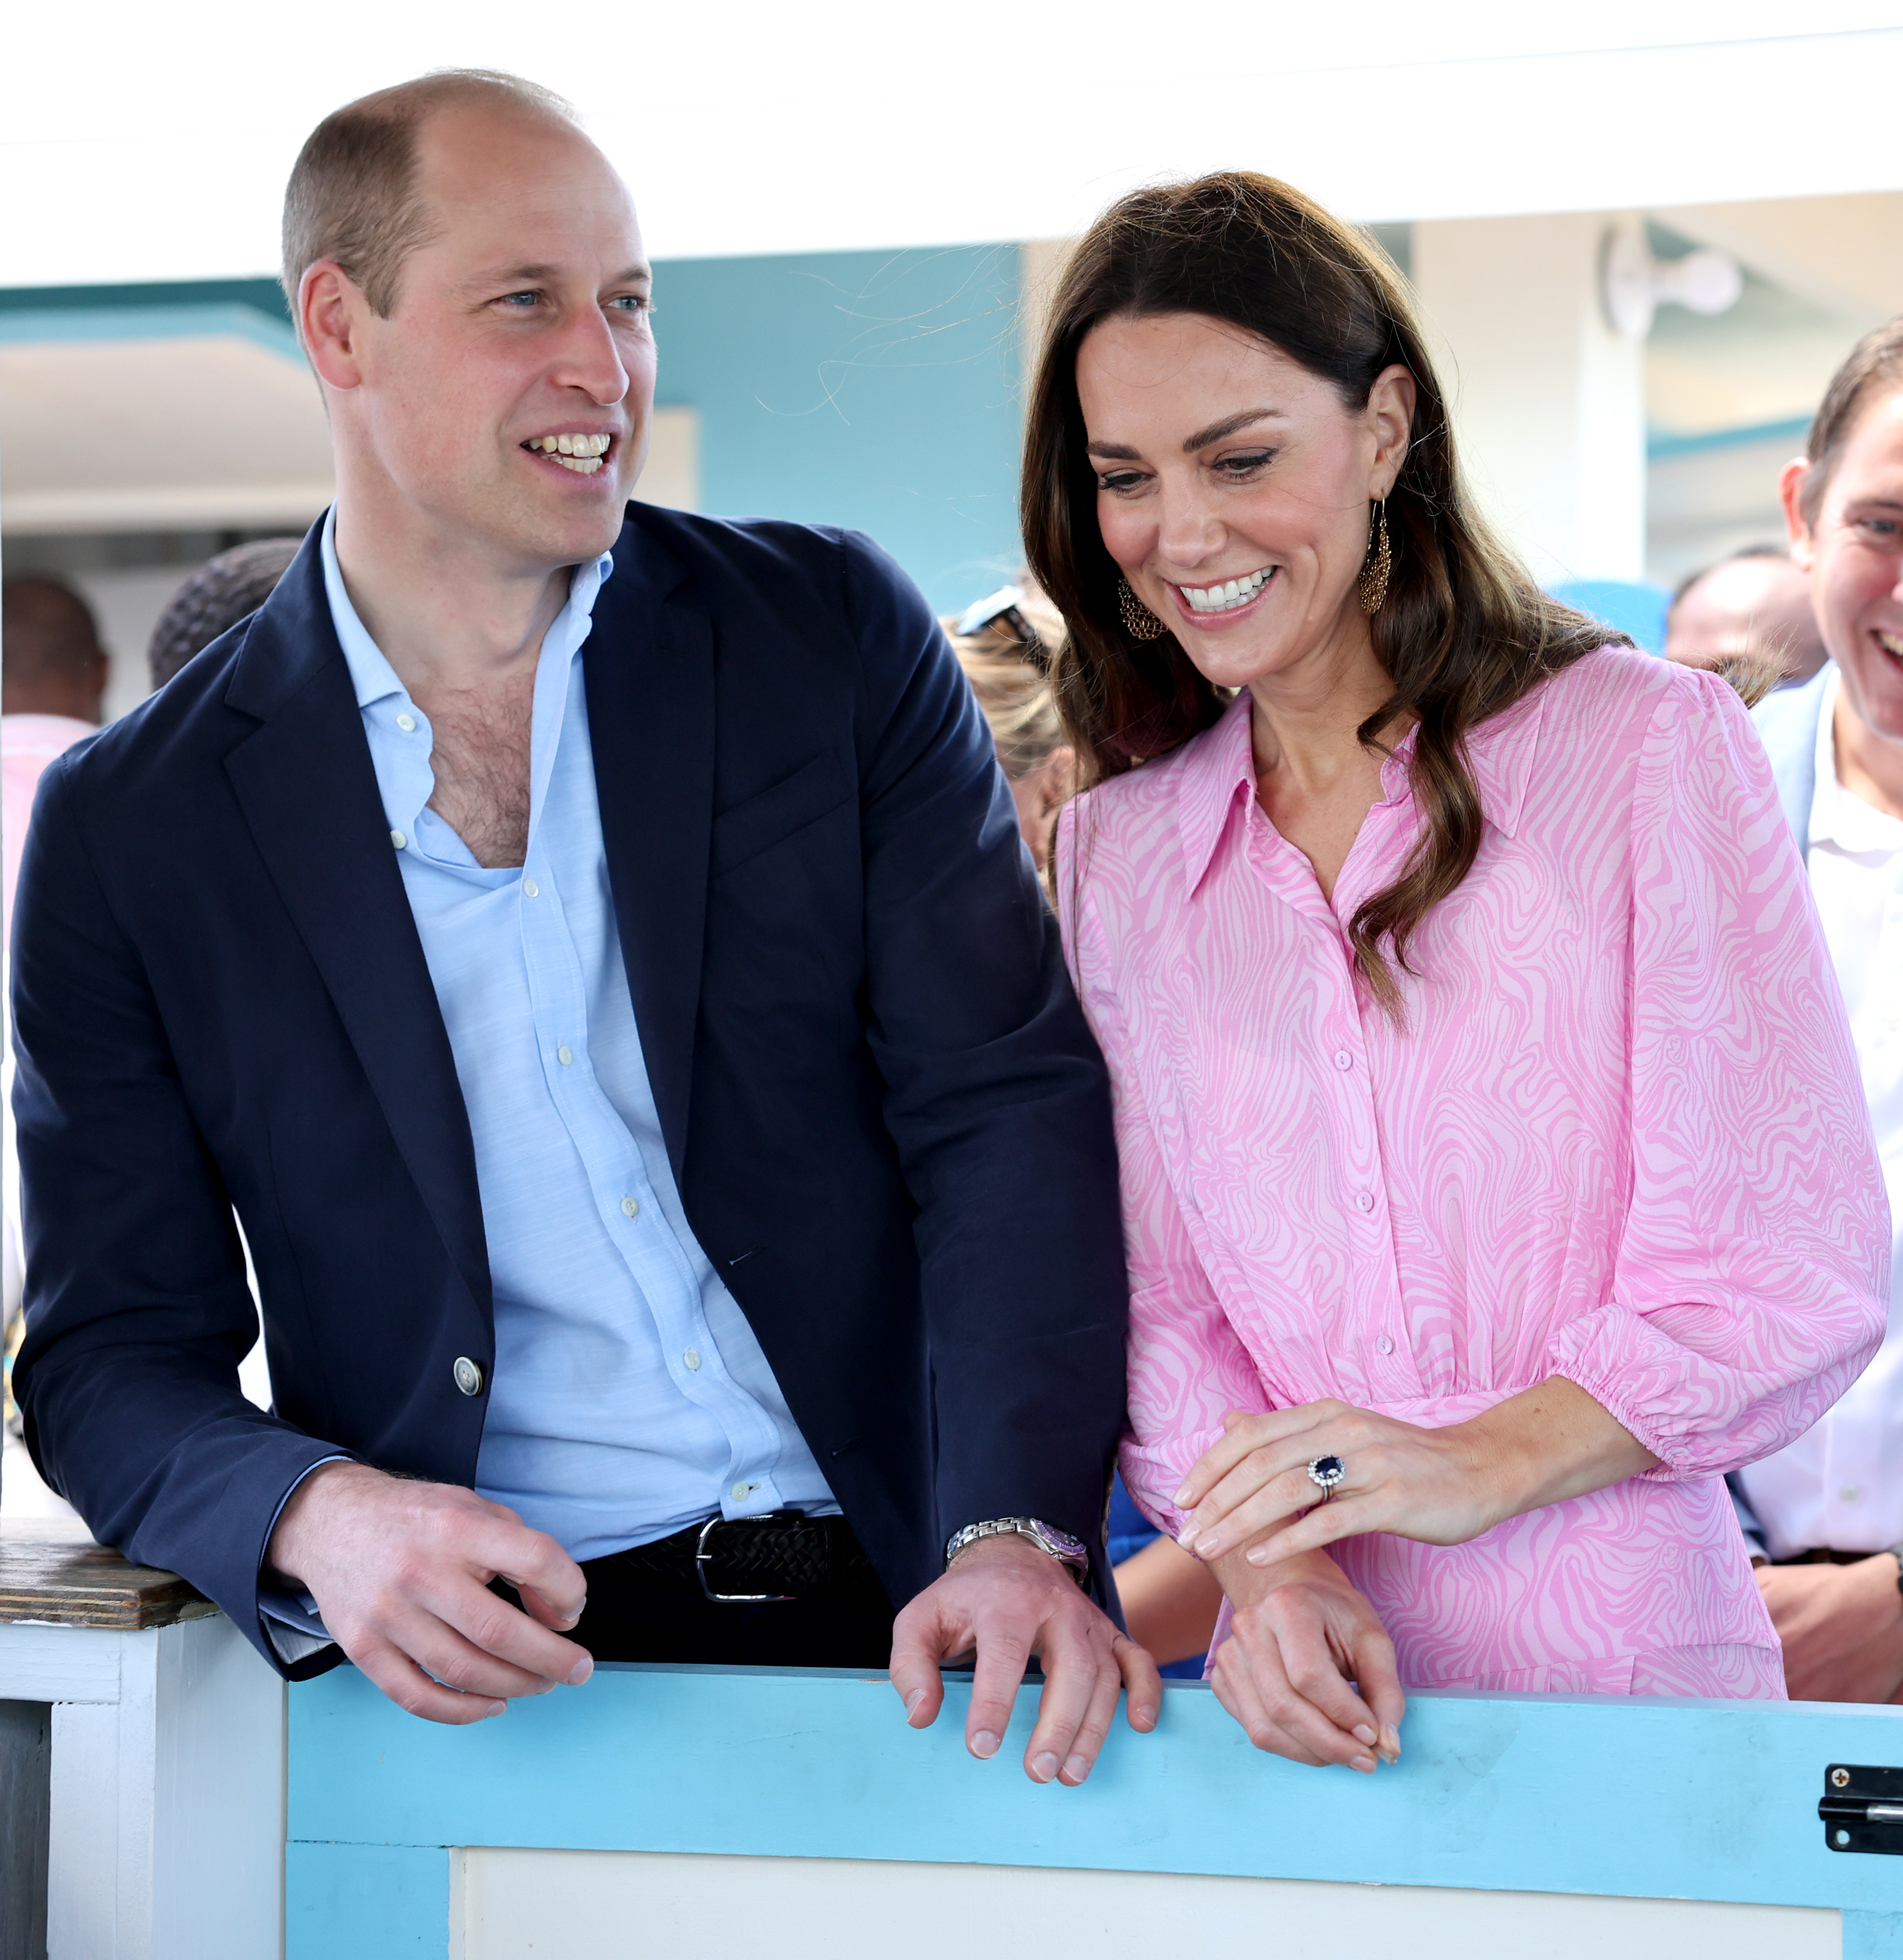 Catherine, Princess of Wales and Prince William, Prince of Wales during a visit to Abaco in Great Abaco, Bahamas, on March 26, 2022. | Source: Getty Images